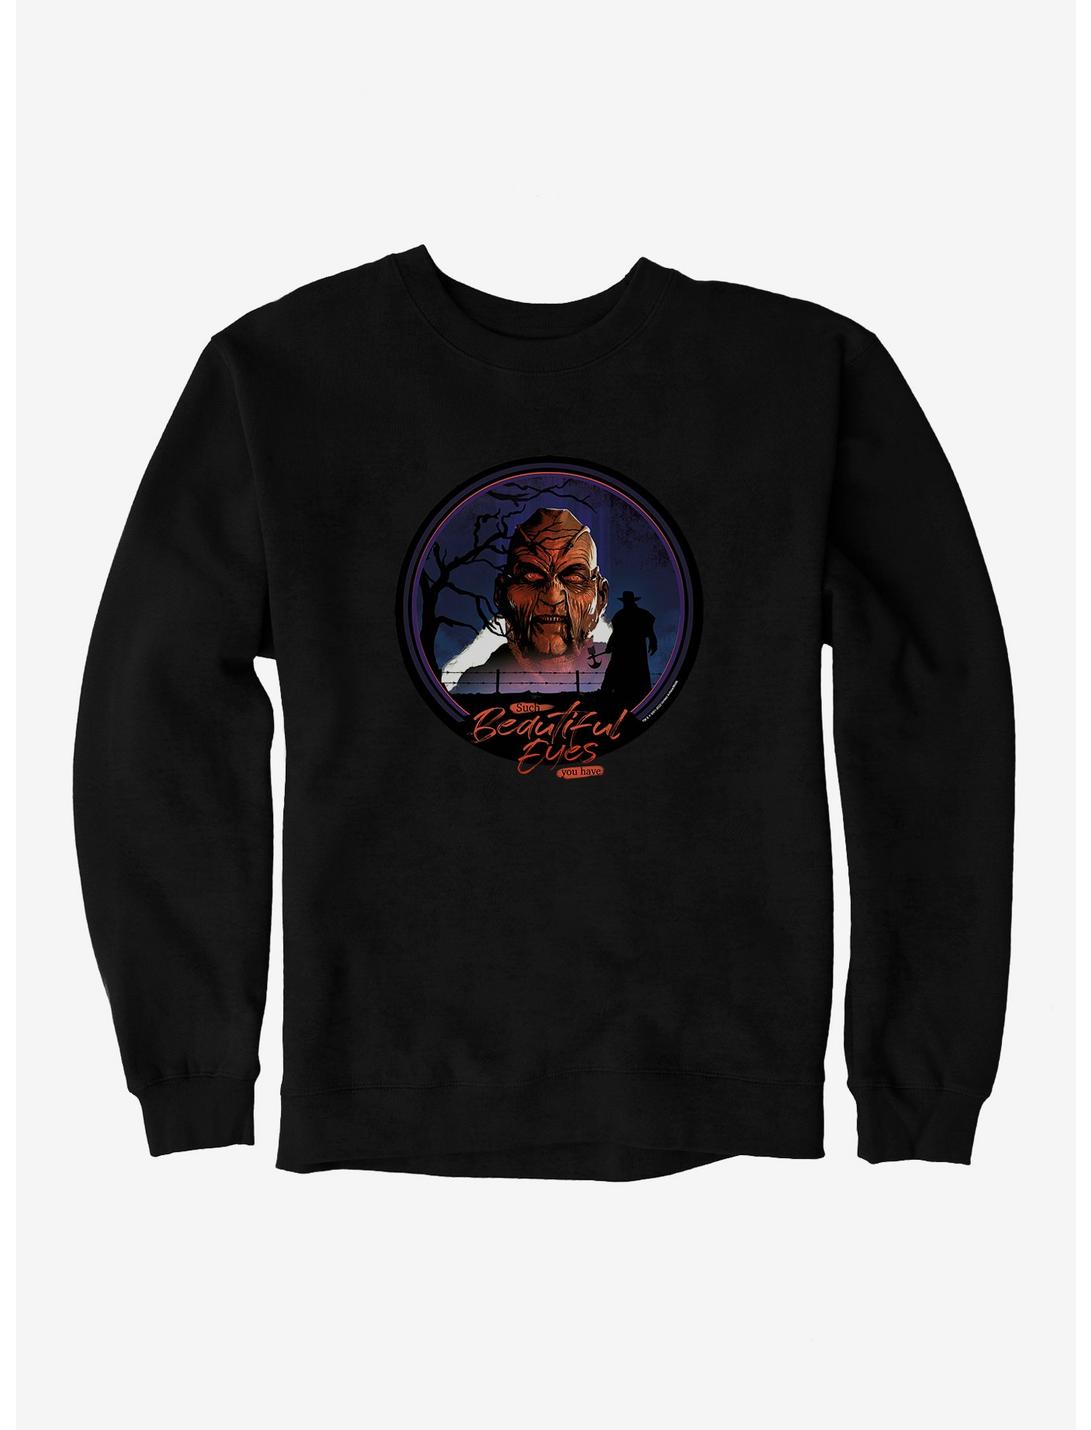 Jeepers Creepers Such Beautiful Eyes Sweatshirt, BLACK, hi-res